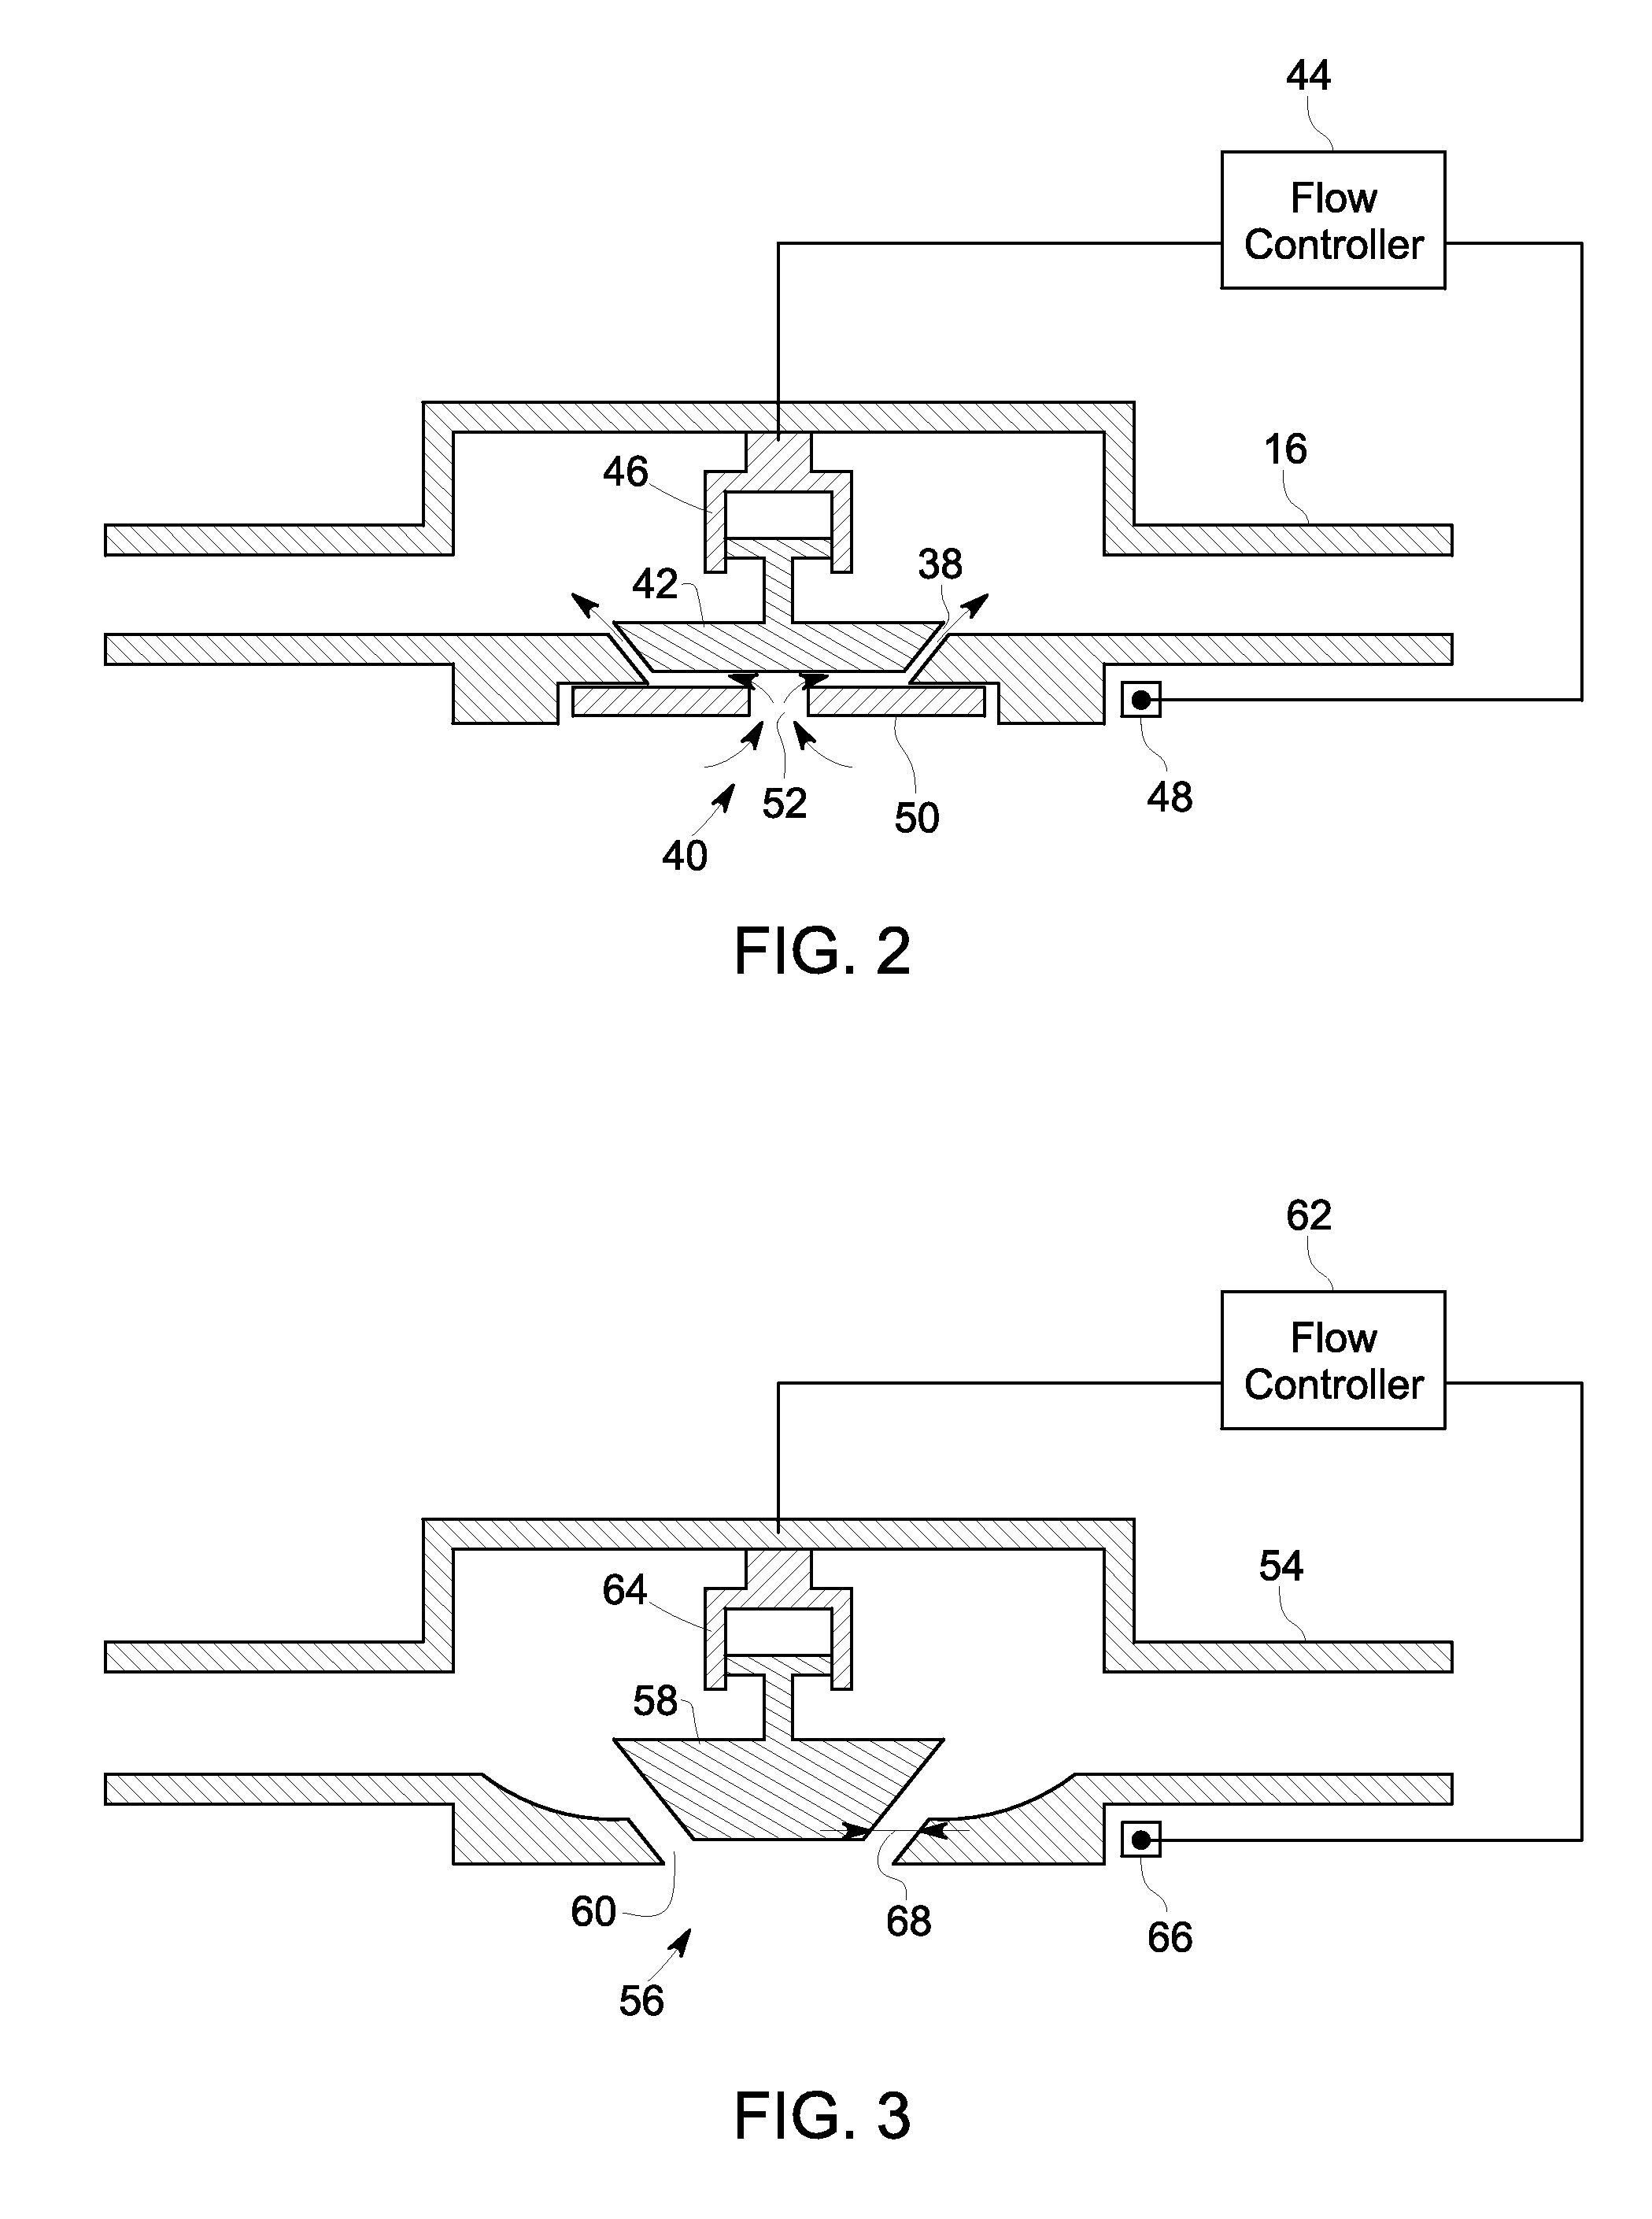 System and method for controlling flow in a well production system